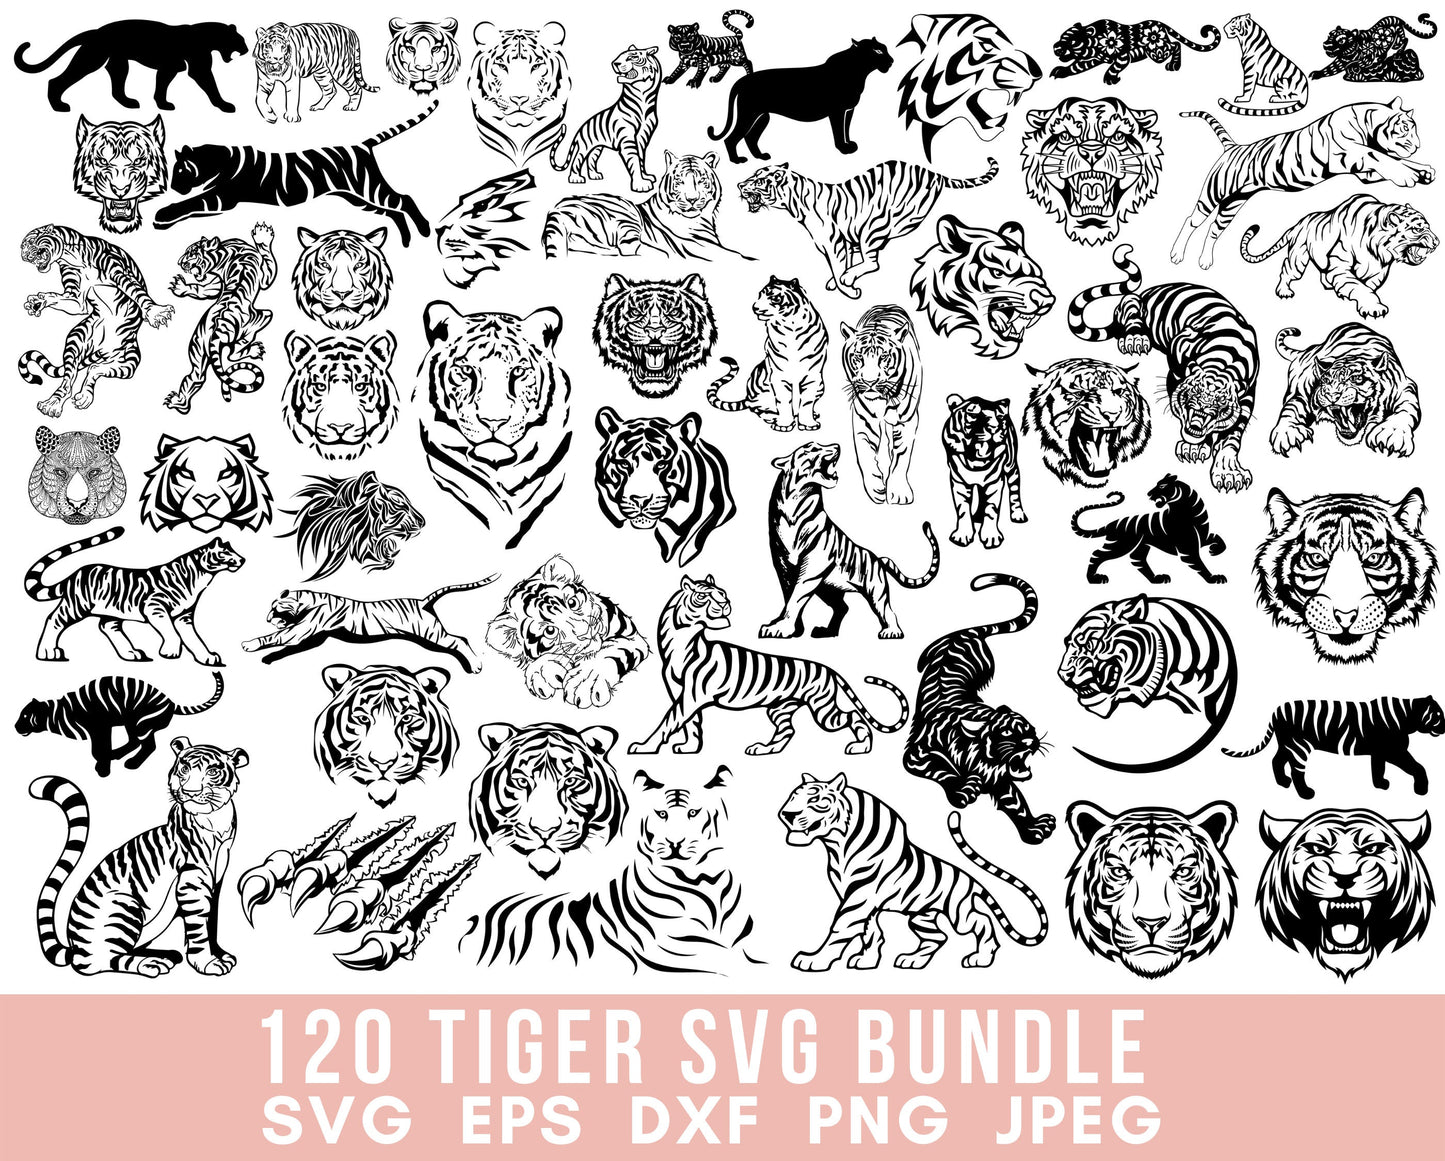 120 Tiger SVG Bundle Tiger Vector Tiger Silhouette Tiger Clipart Tiger cut file Year of the Tiger head wildflife animal Svg files for cricut